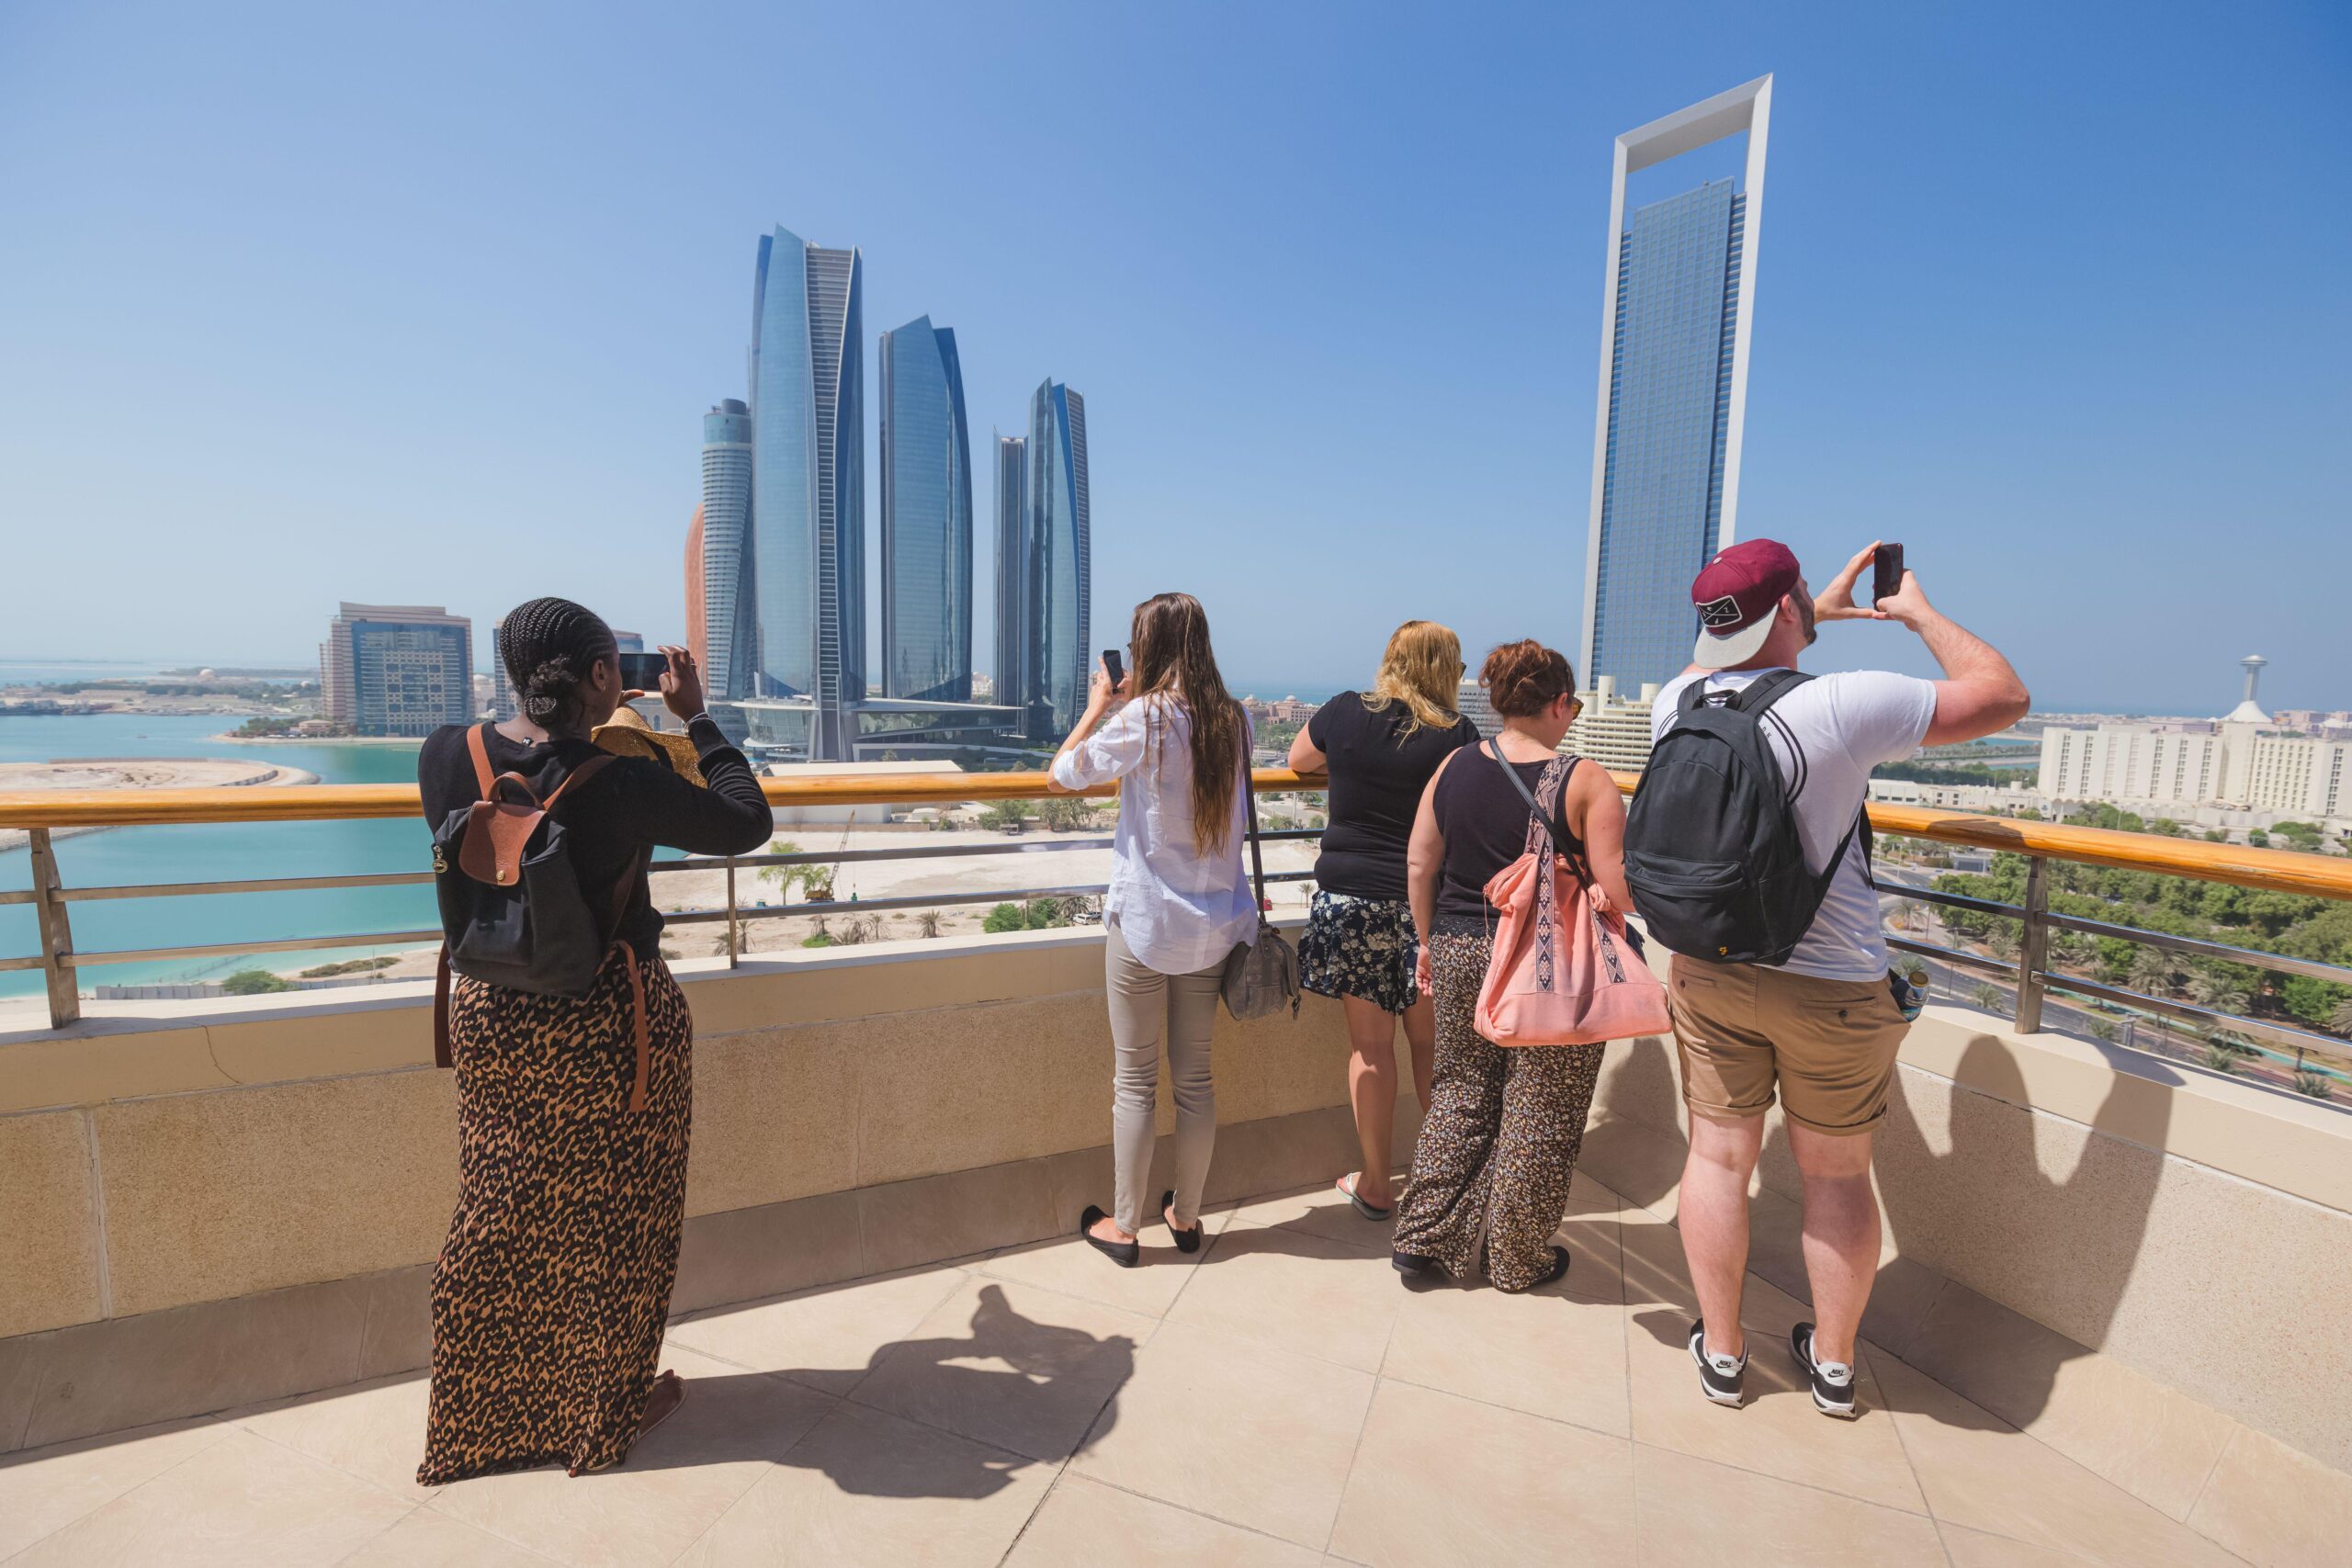 Tourists photograph the Abu Dhabi skyline. Travel funding is small compared to how much tourism contributes to the economy